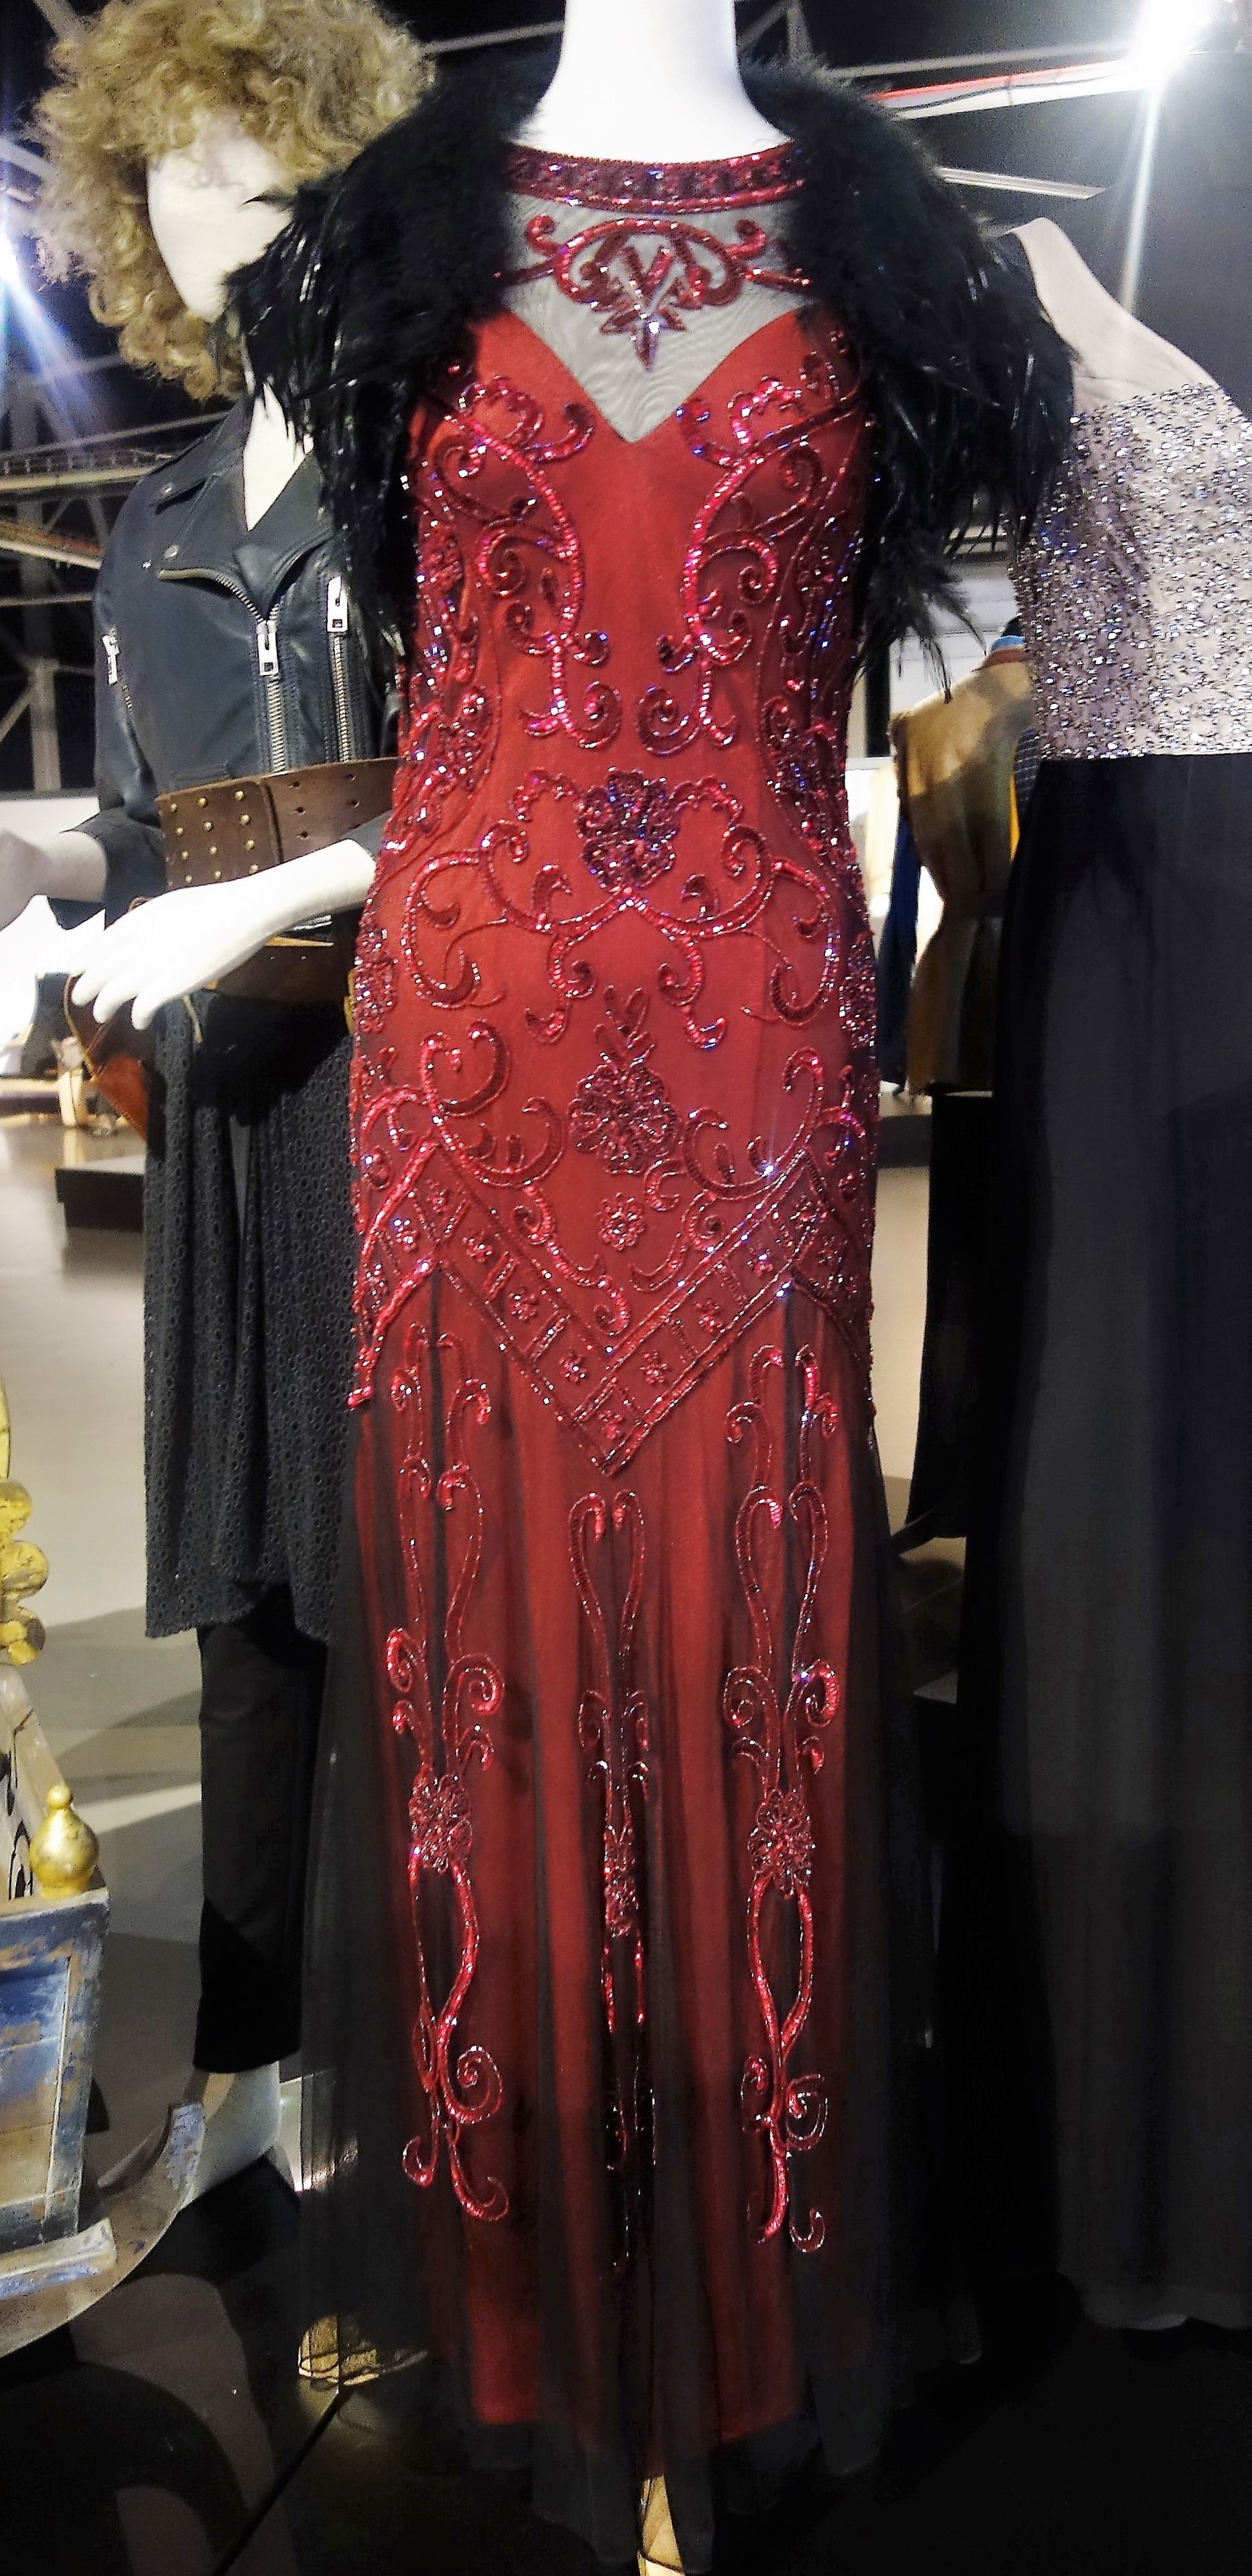 Stunning Beading on River Song's evening dress